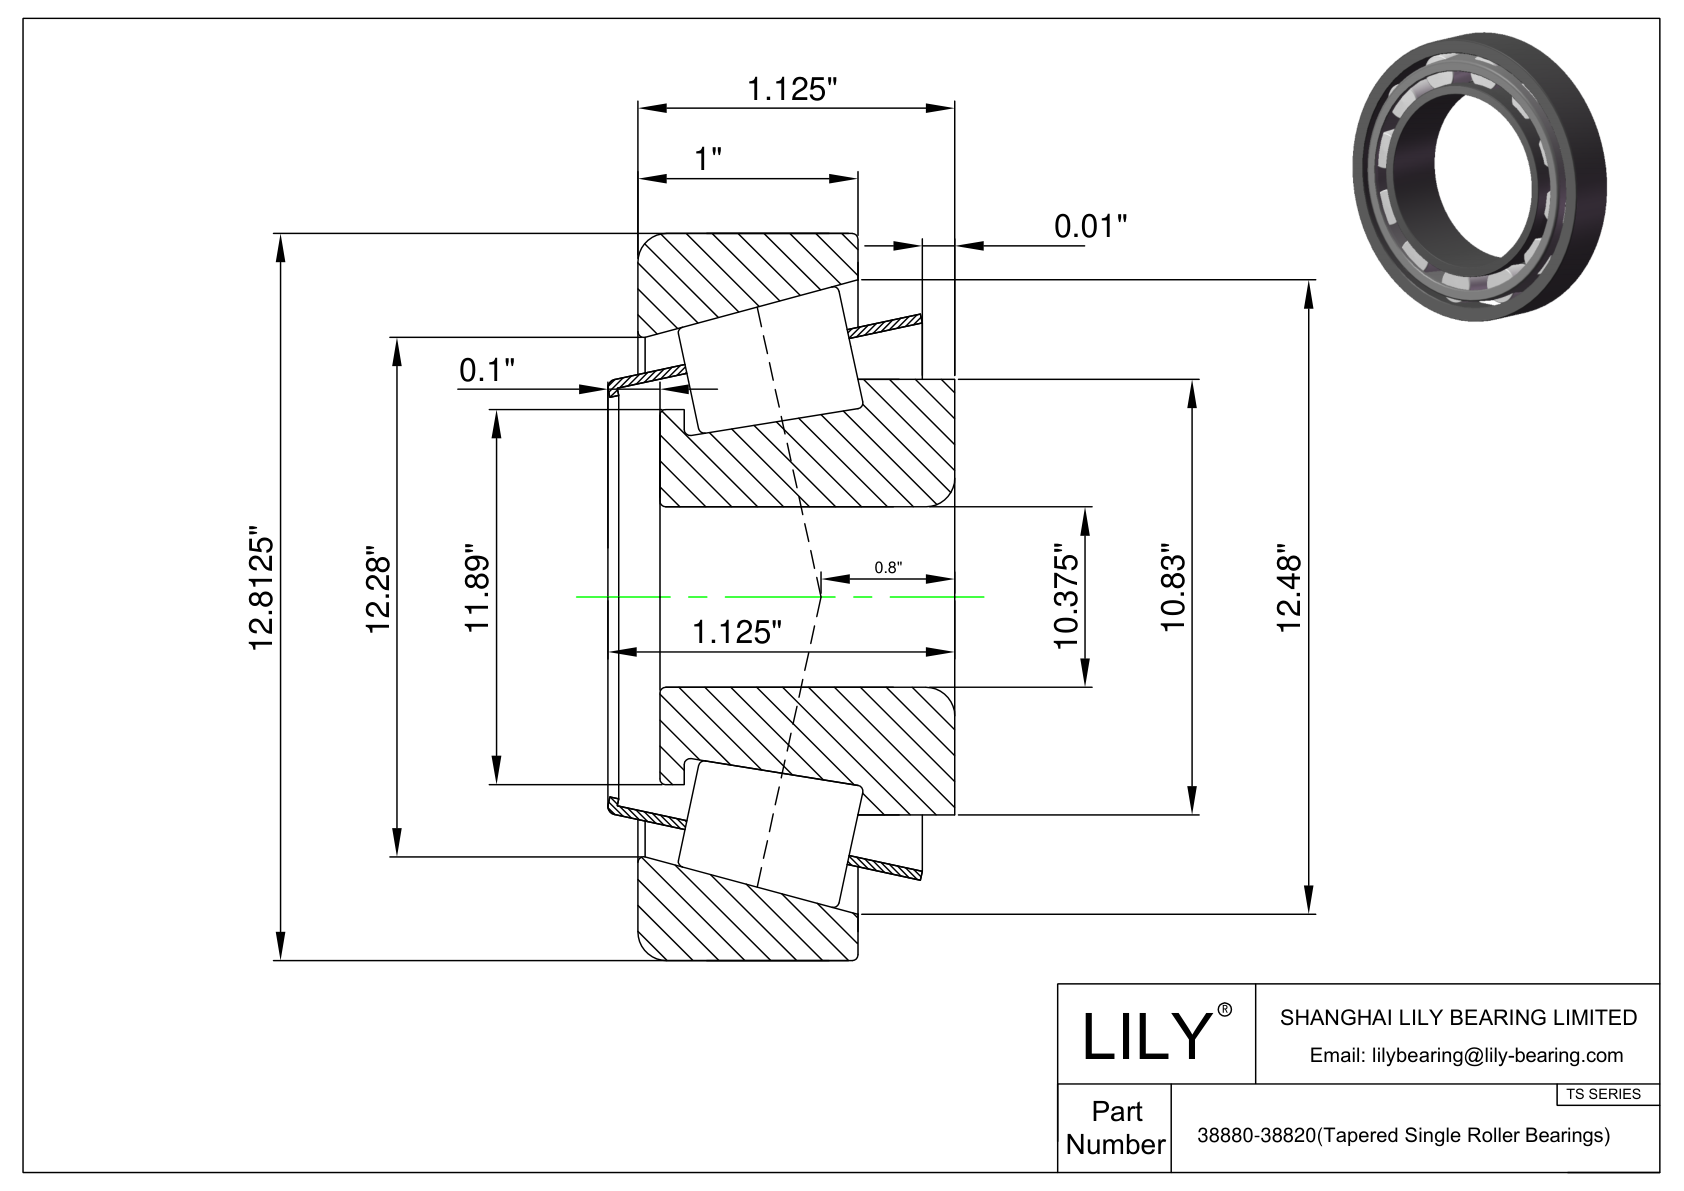 38880-38820 TS (Tapered Single Roller Bearings) (Imperial) cad drawing